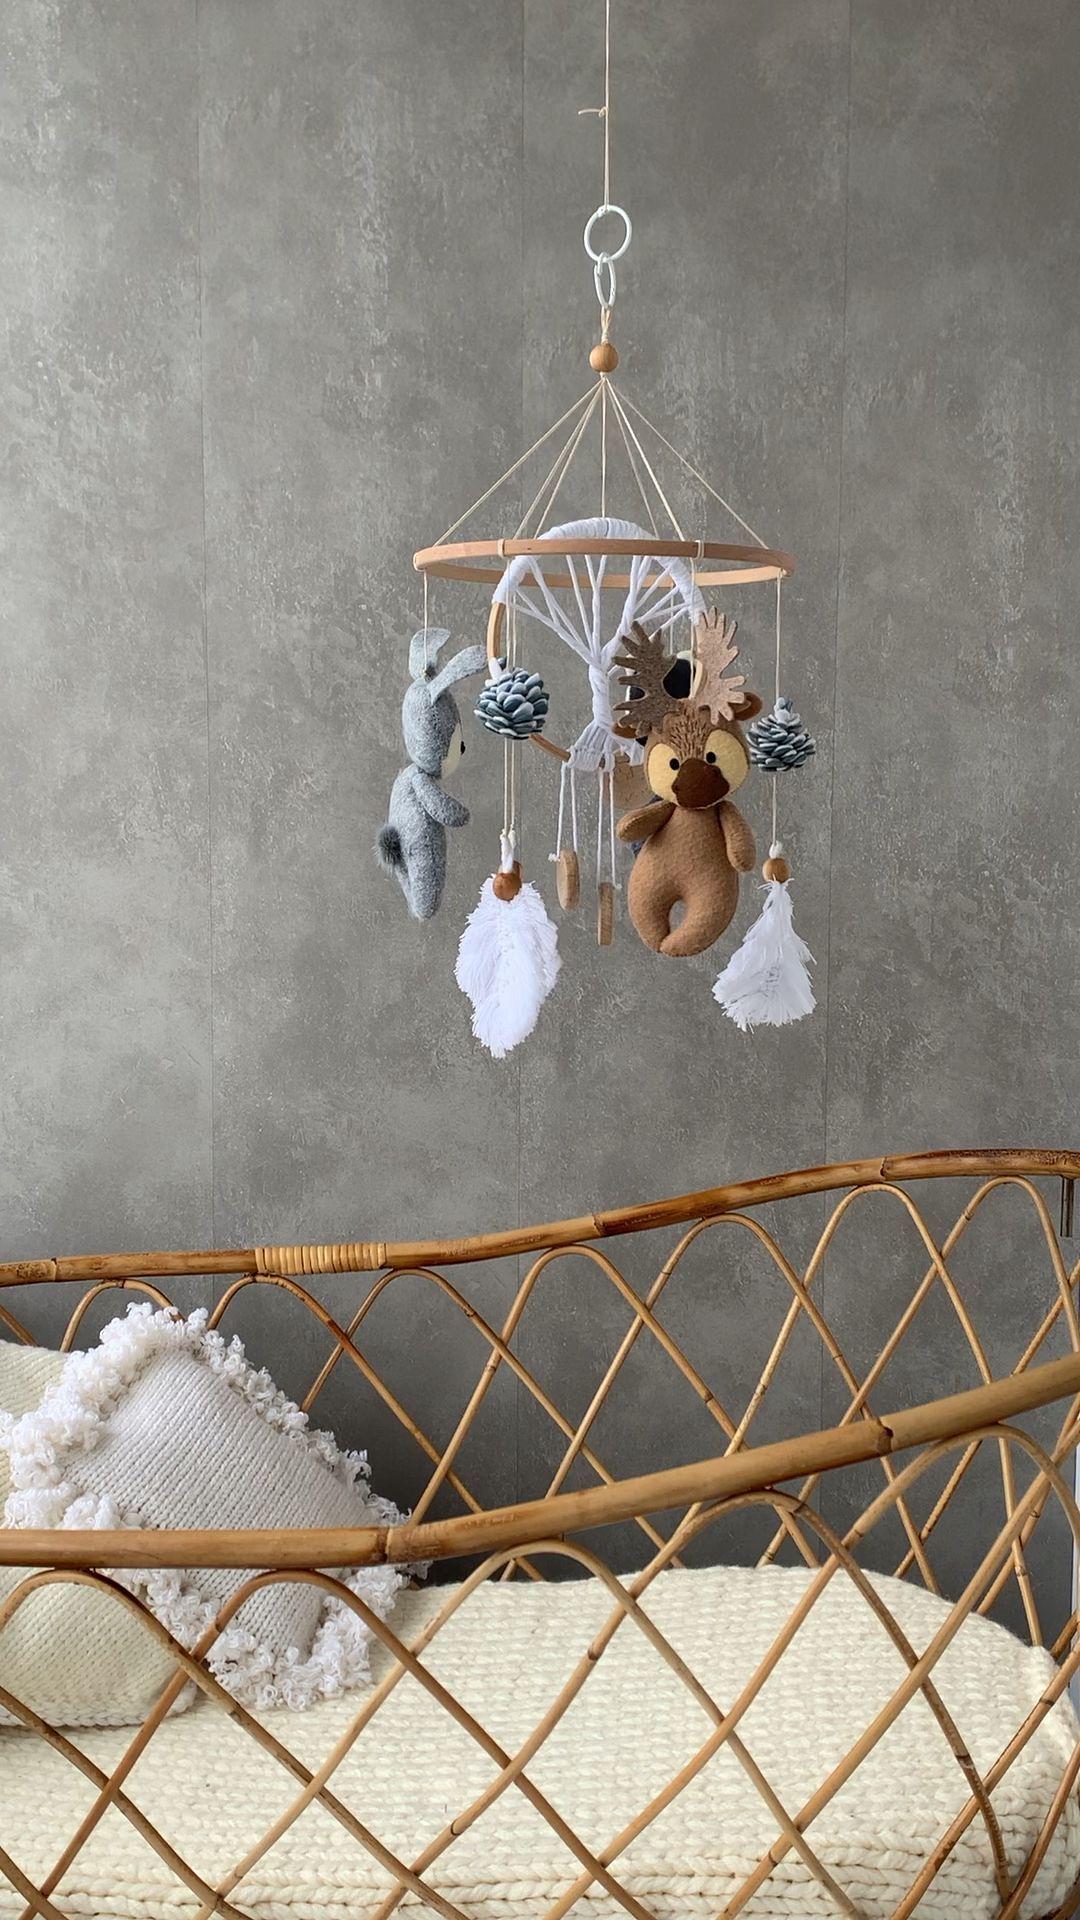 Baby crib mobile with forest animals toys such as Rabbit | Etsy -   diy Interieur baby